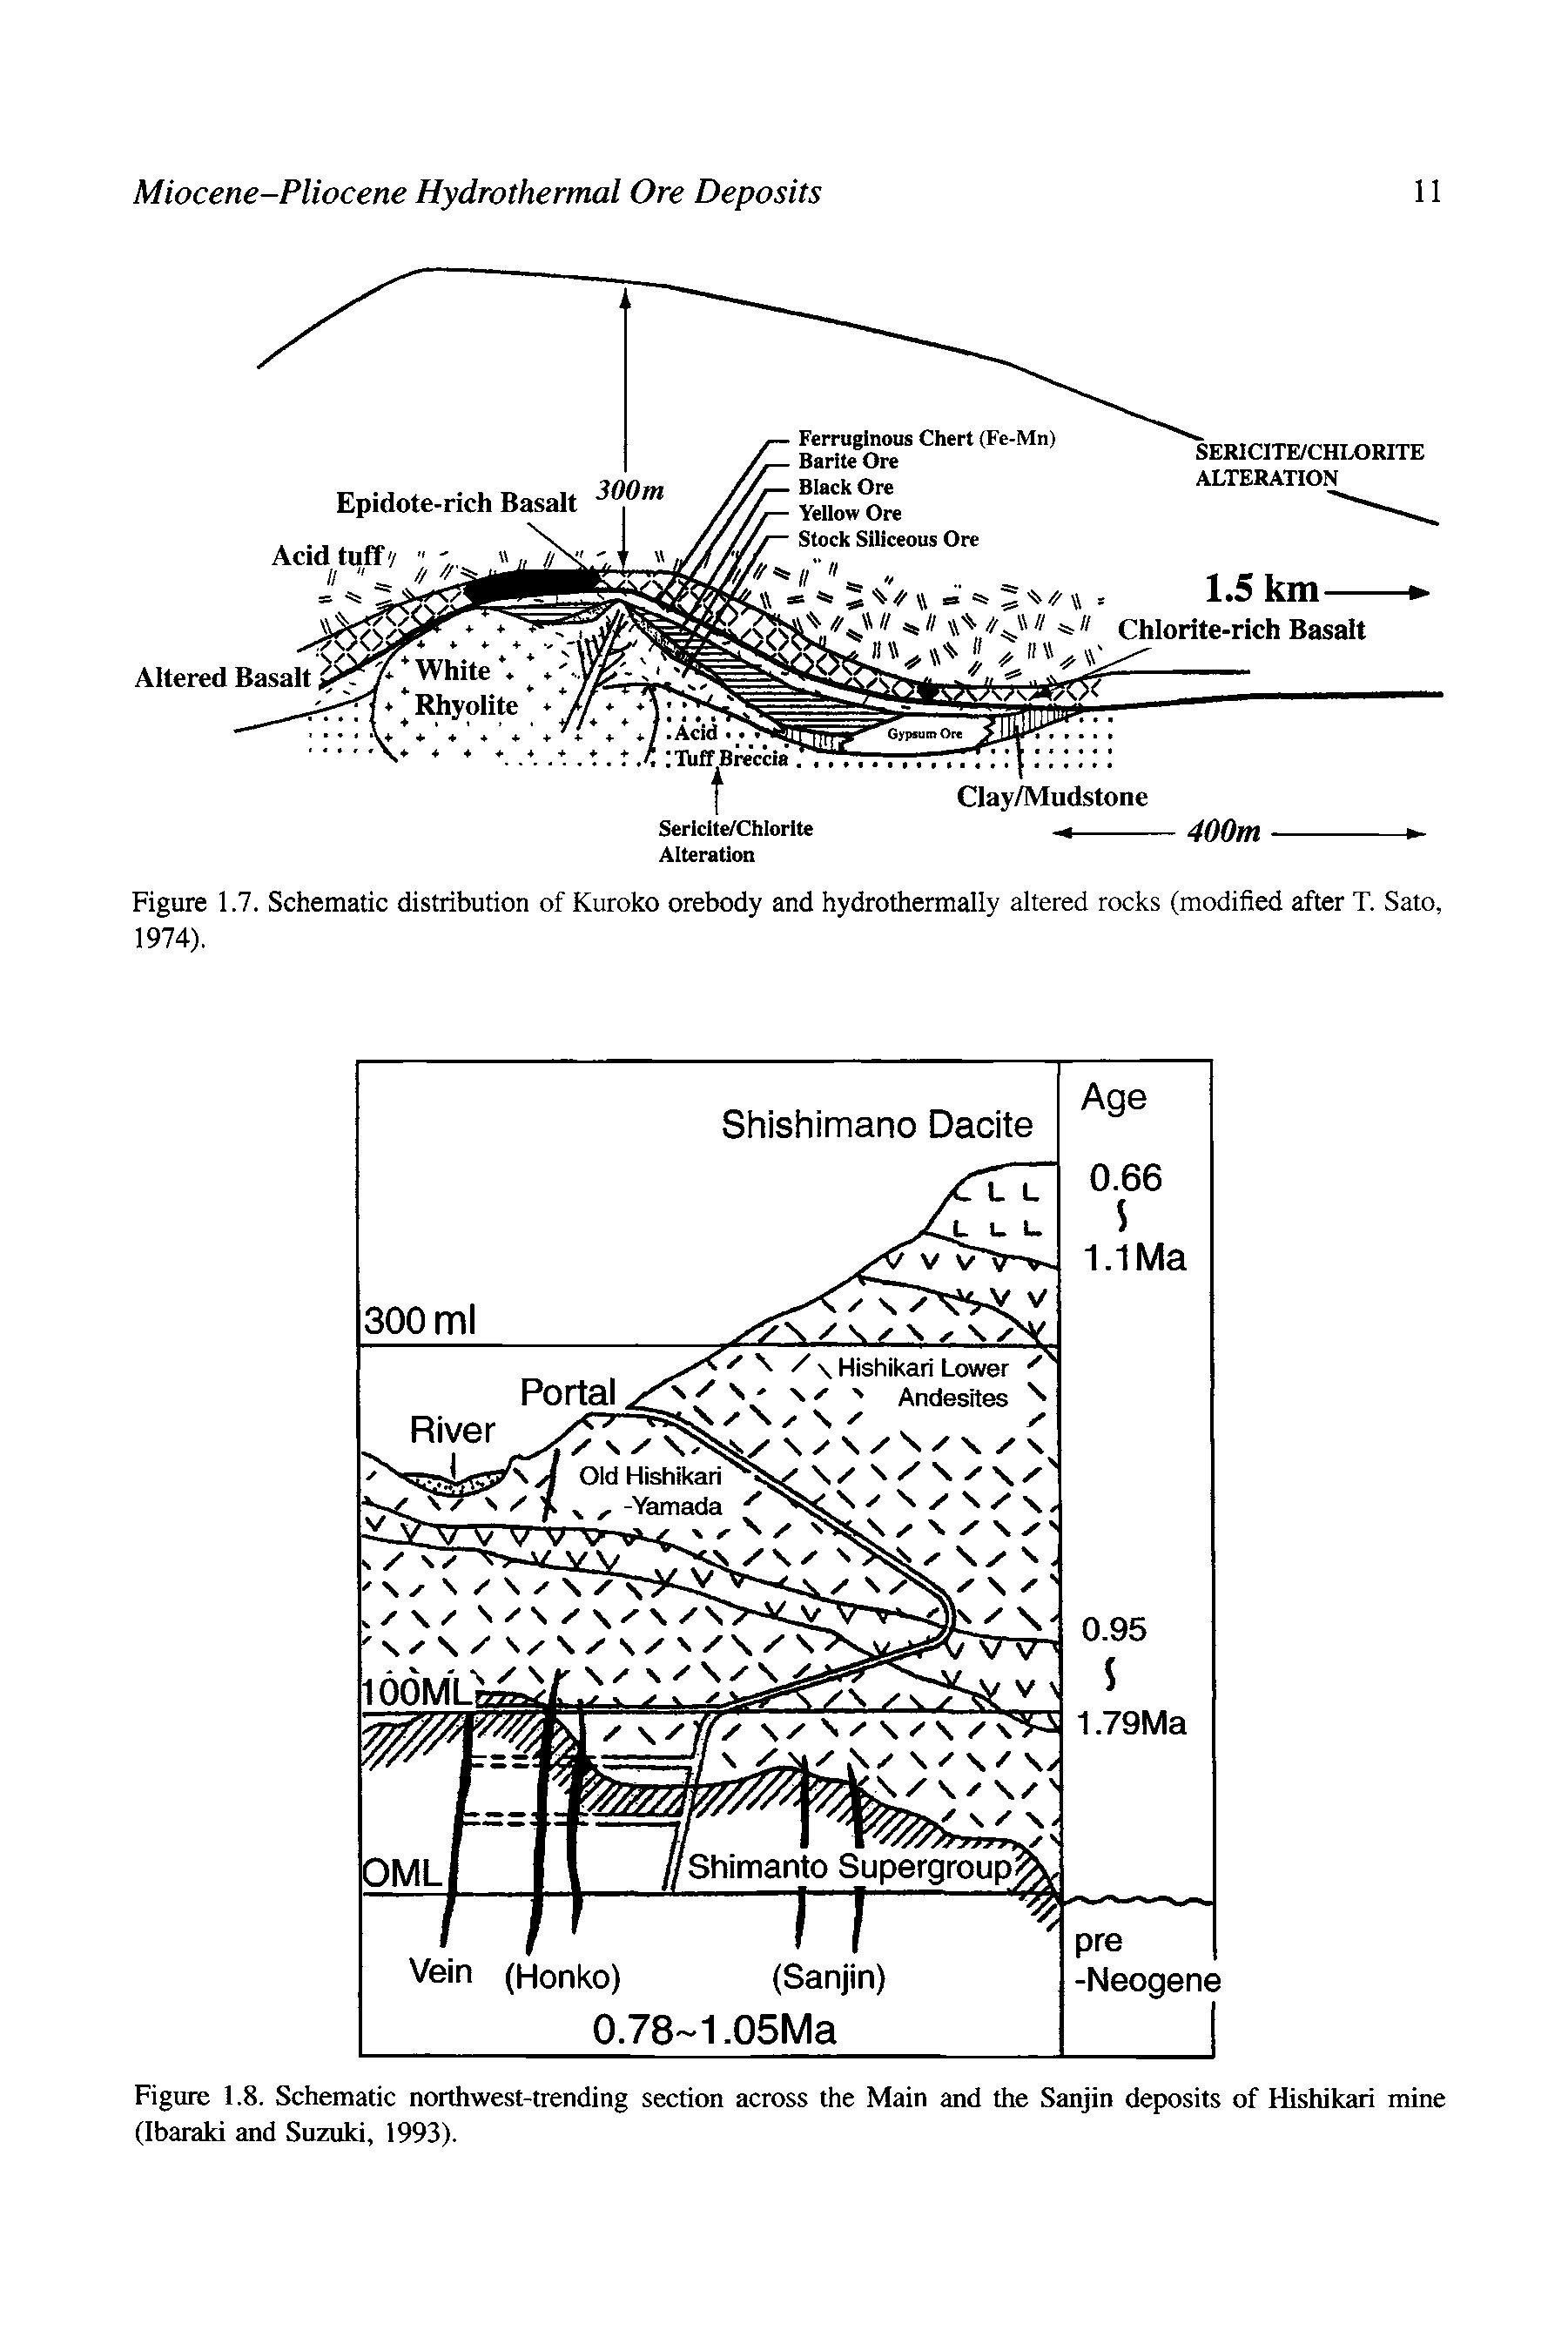 Figure 1.7. Schematic distribution of Kuroko orebody and hydrothermally altered rocks (modified after T. Sato, 1974).